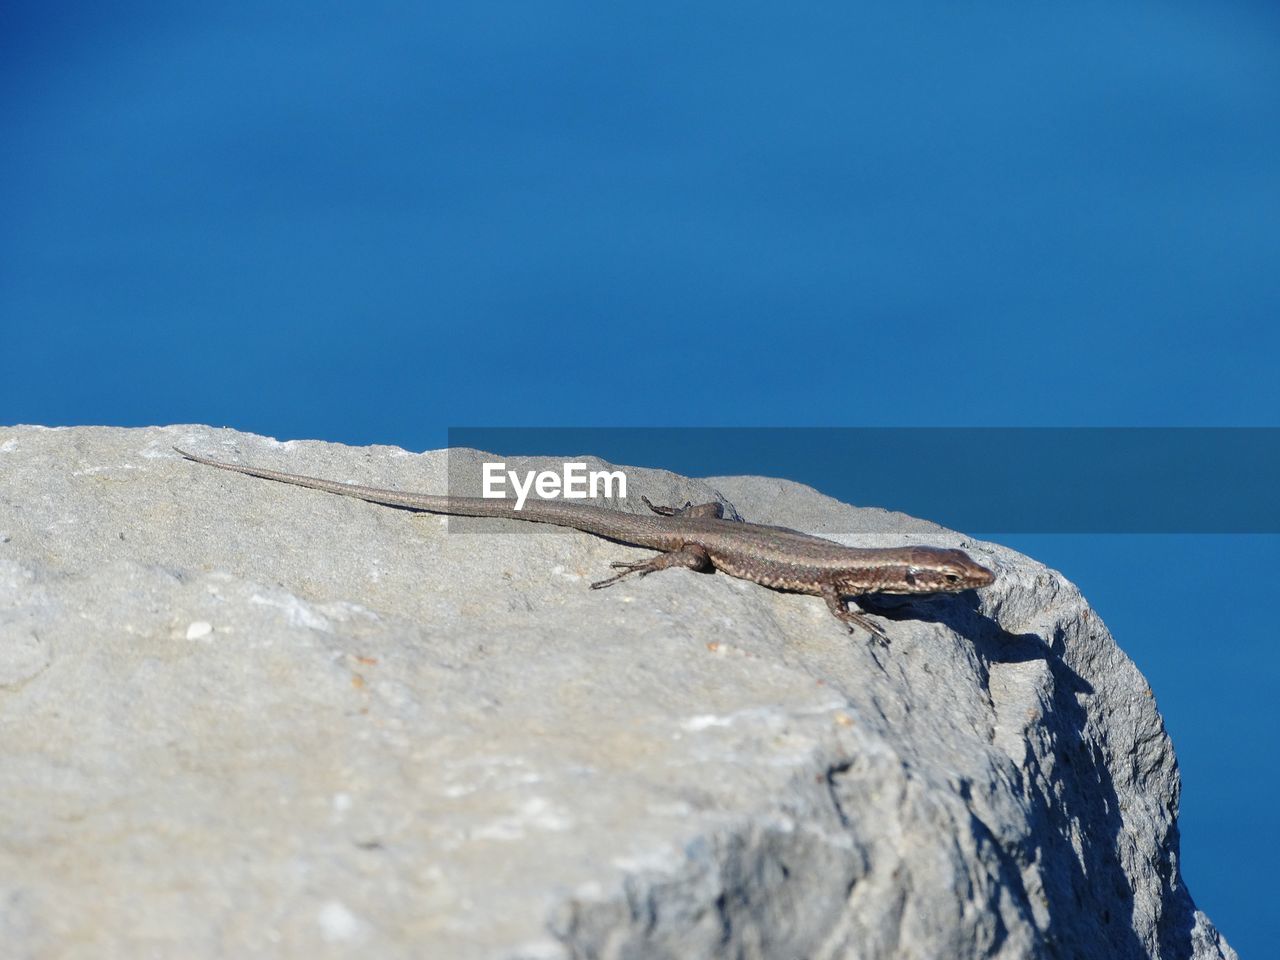 Low angle view rock with lizard